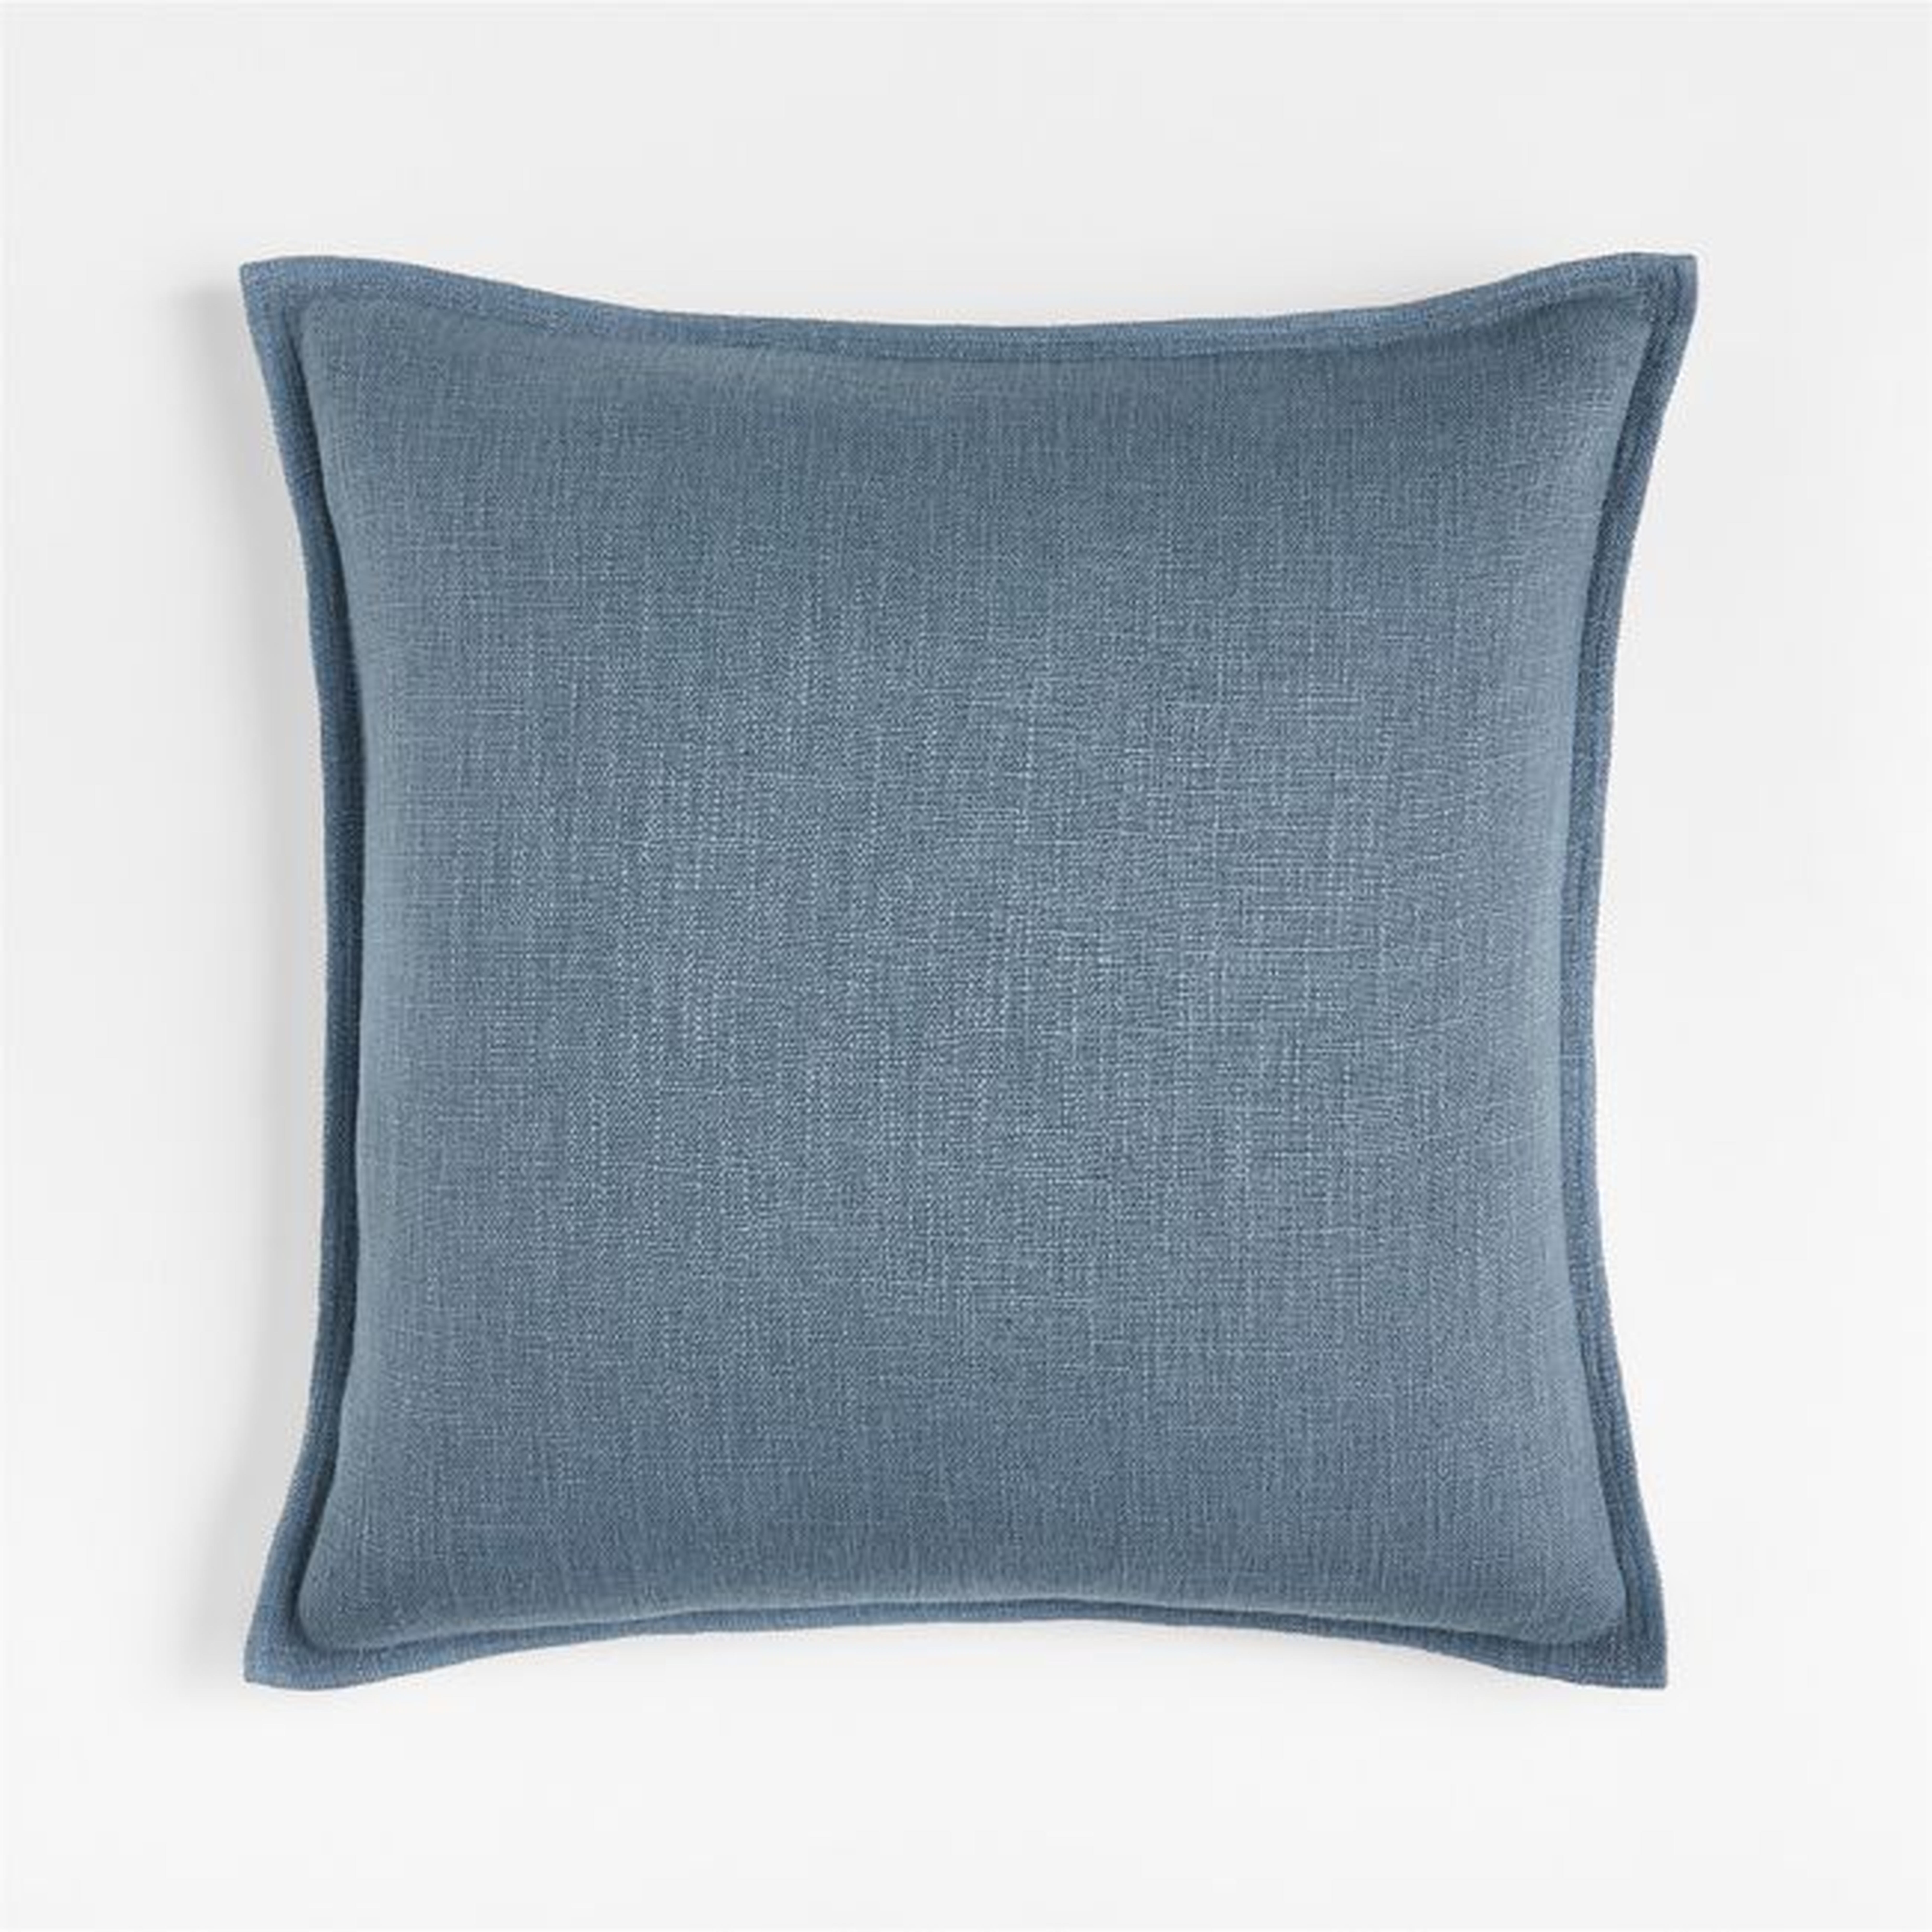 Blue 20"x20" Laundered Linen Throw Pillow with Feather Insert - Crate and Barrel